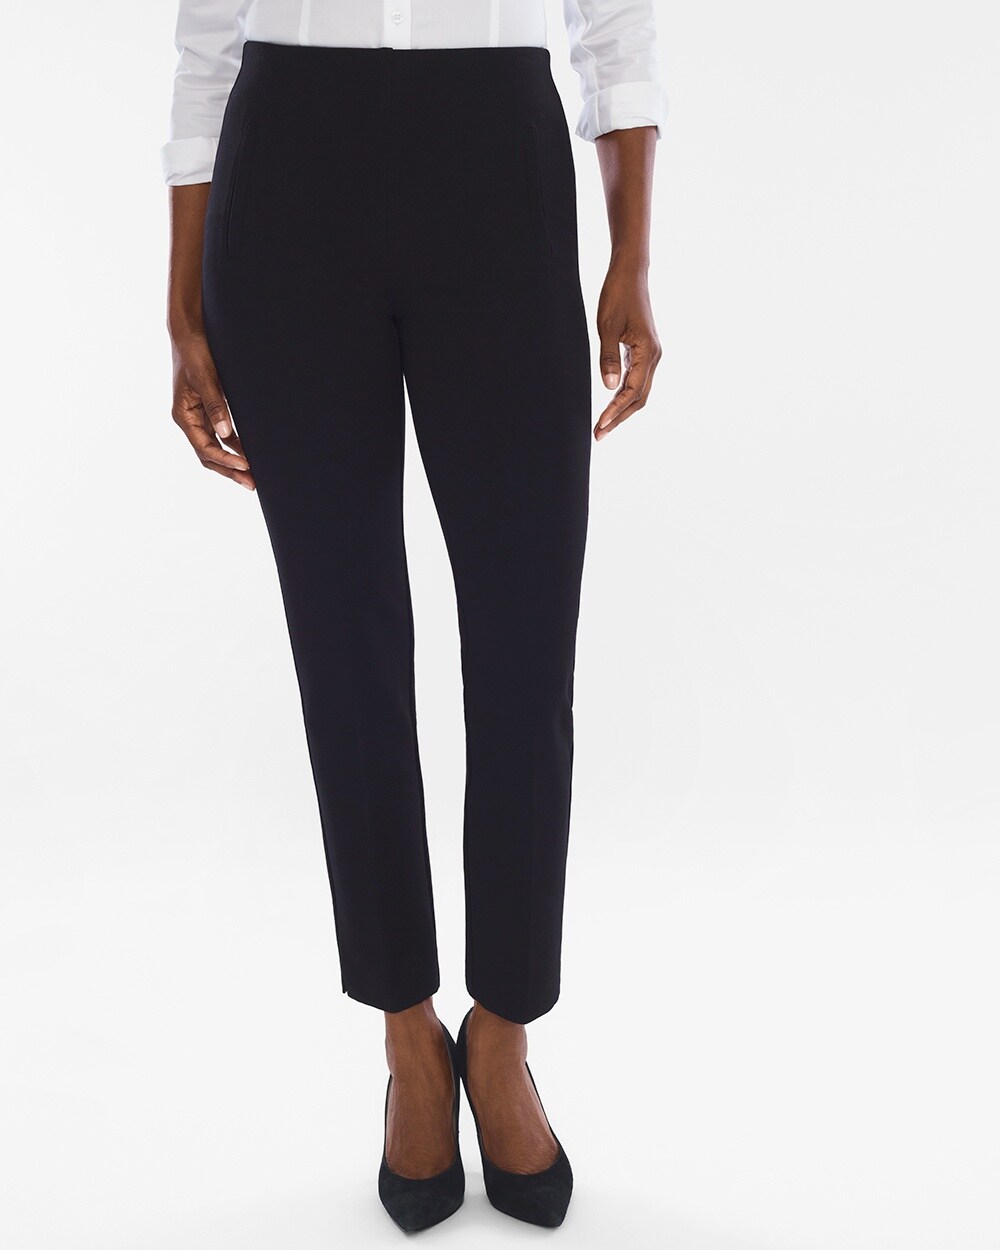 So Slimming Juliet Ankle Pants - Chico's